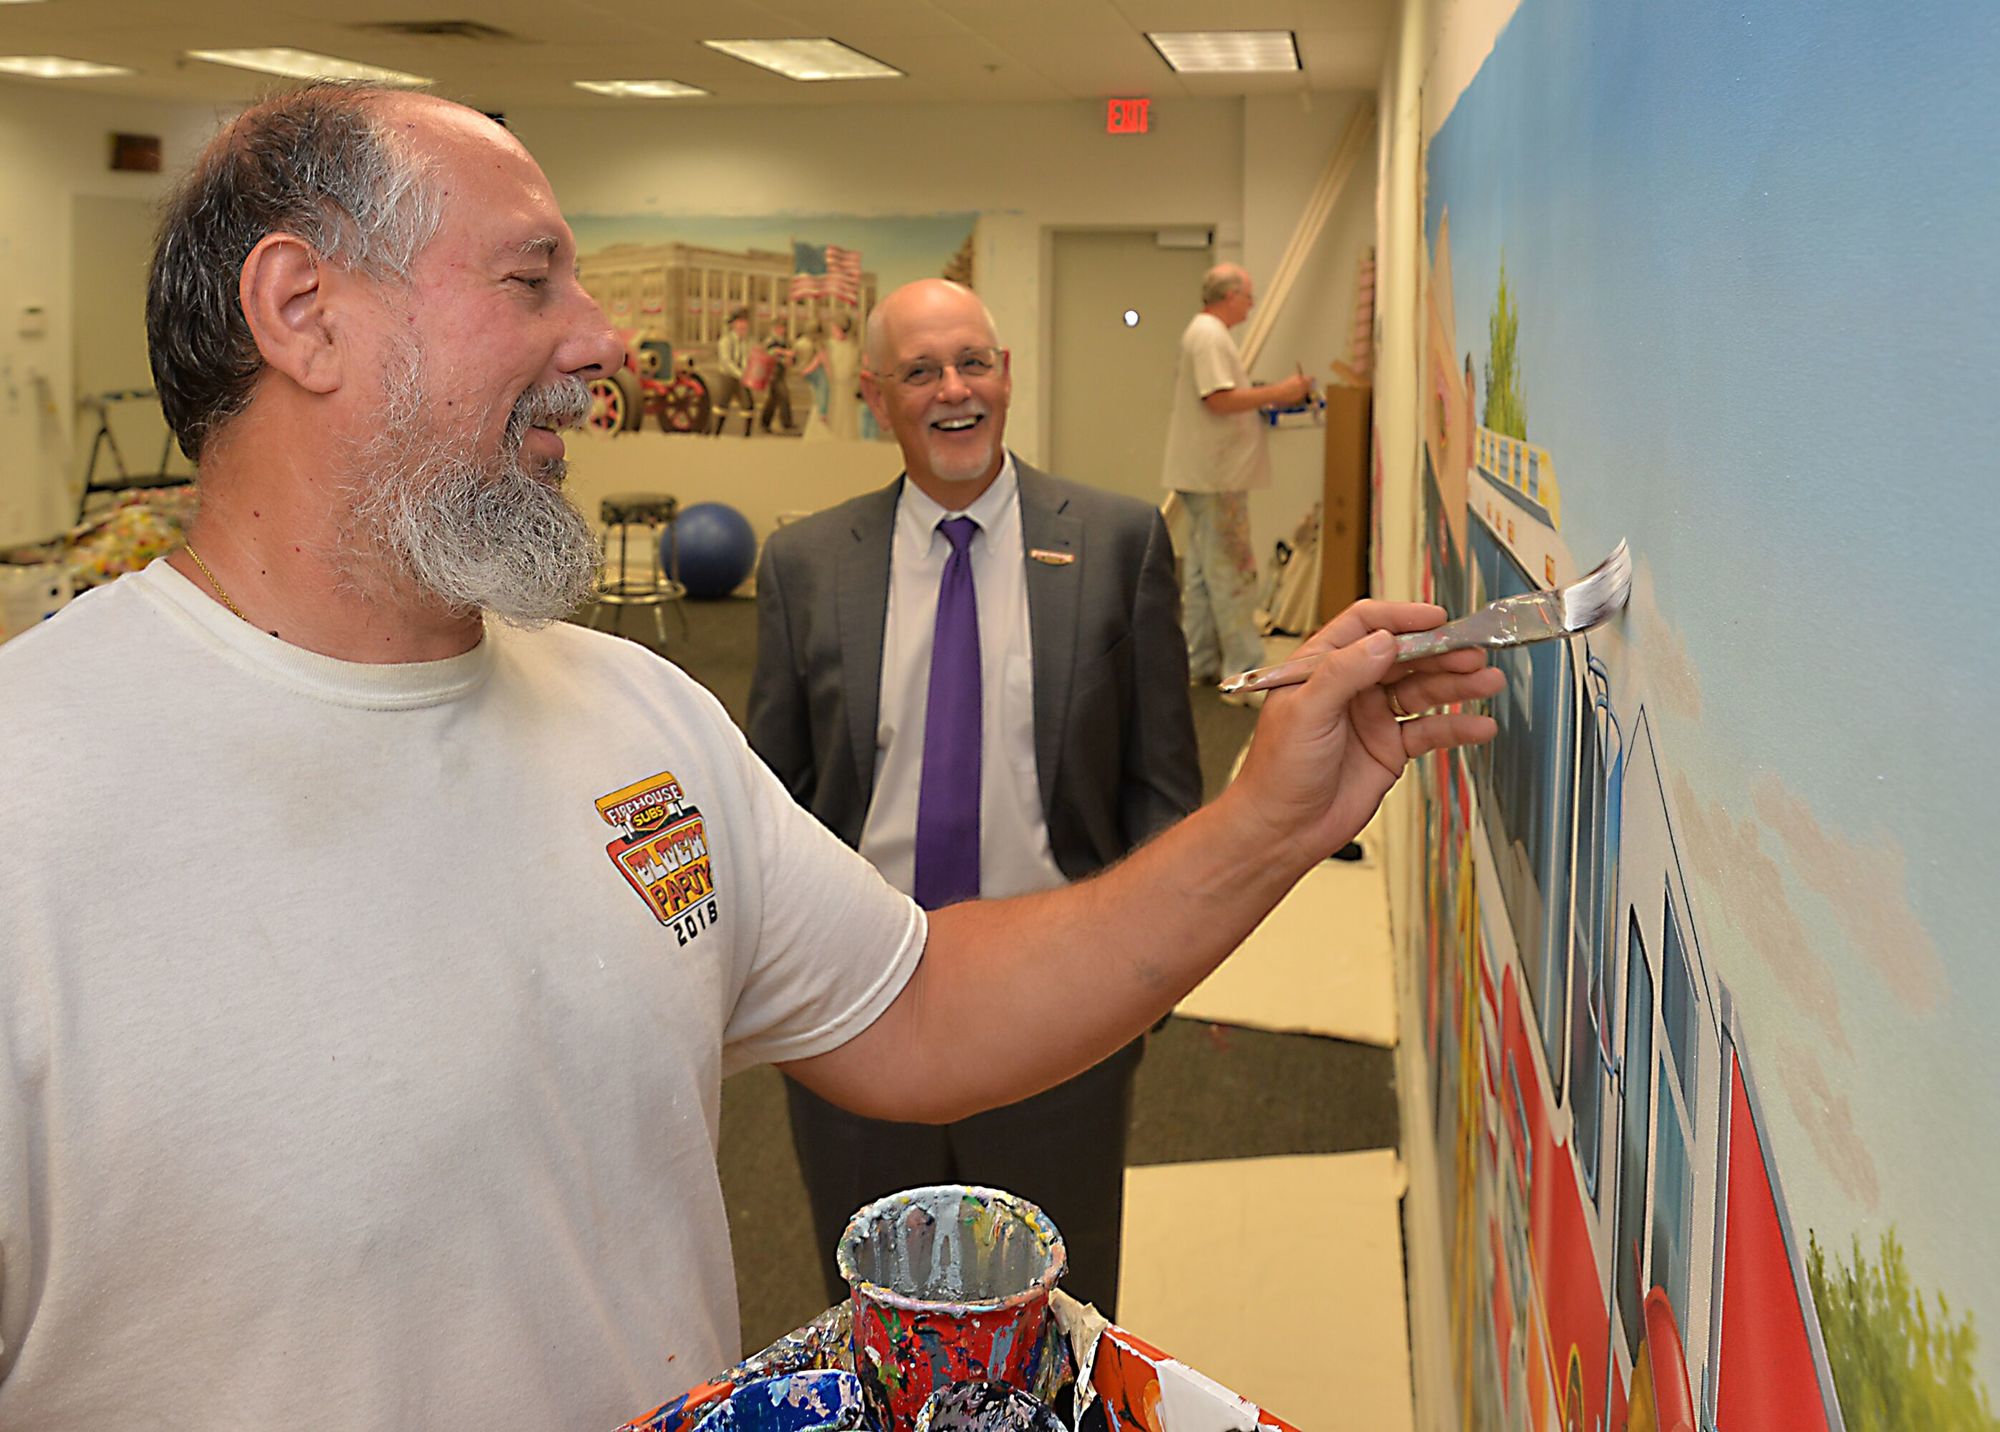 Firehouse Subs CEO Don Fox watches Joe Puskas, the company’s chief mural artist, work in the Firehouse Subs headquarters studio in South Jacksonville. Firehouse says Puskas and his team have painted more than 1,165 murals.